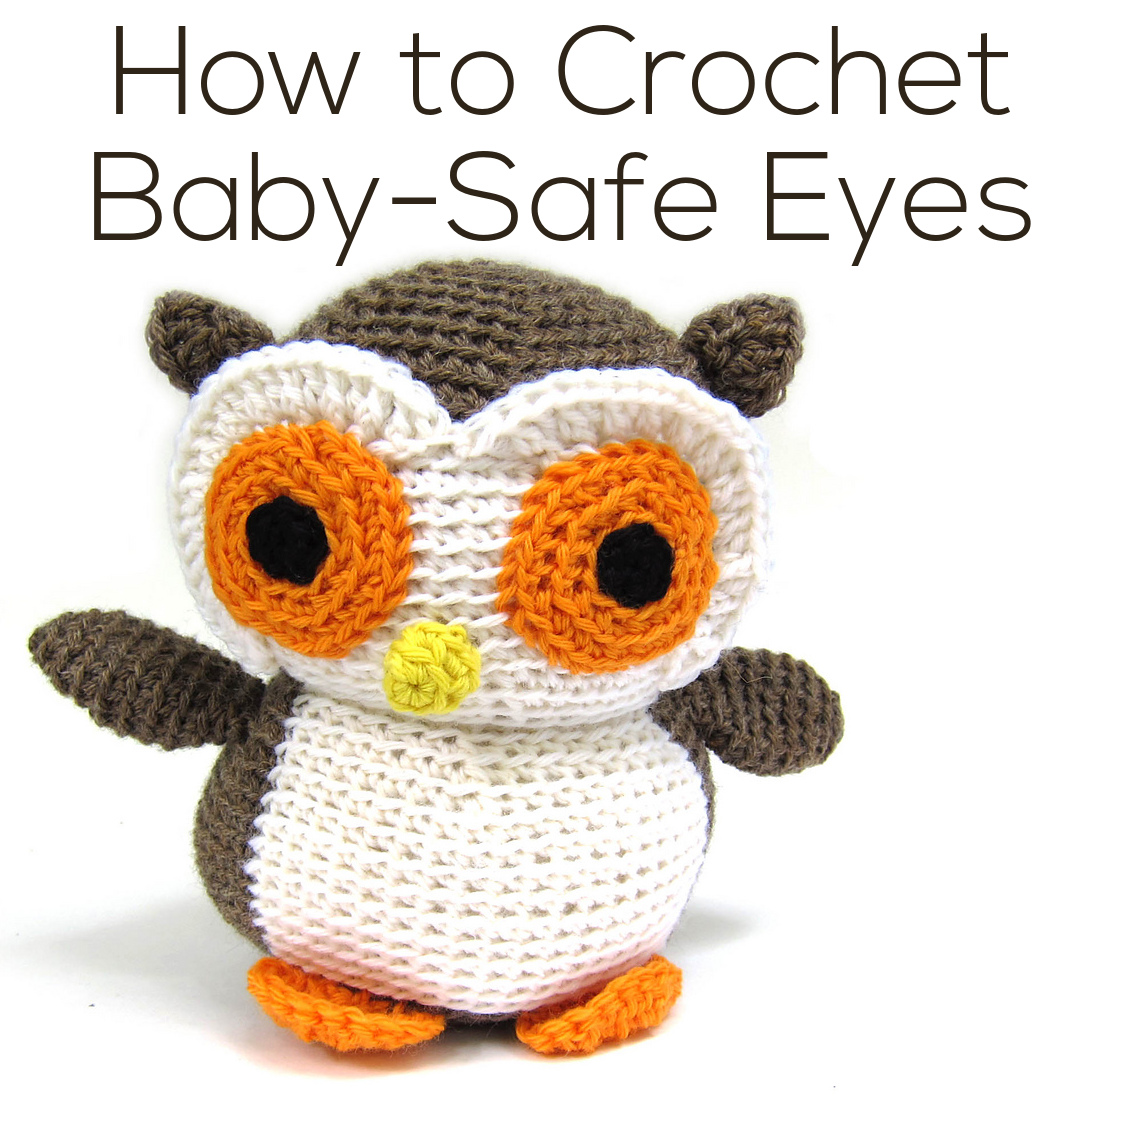 How to Attach Safety Eyes to Amigurumi